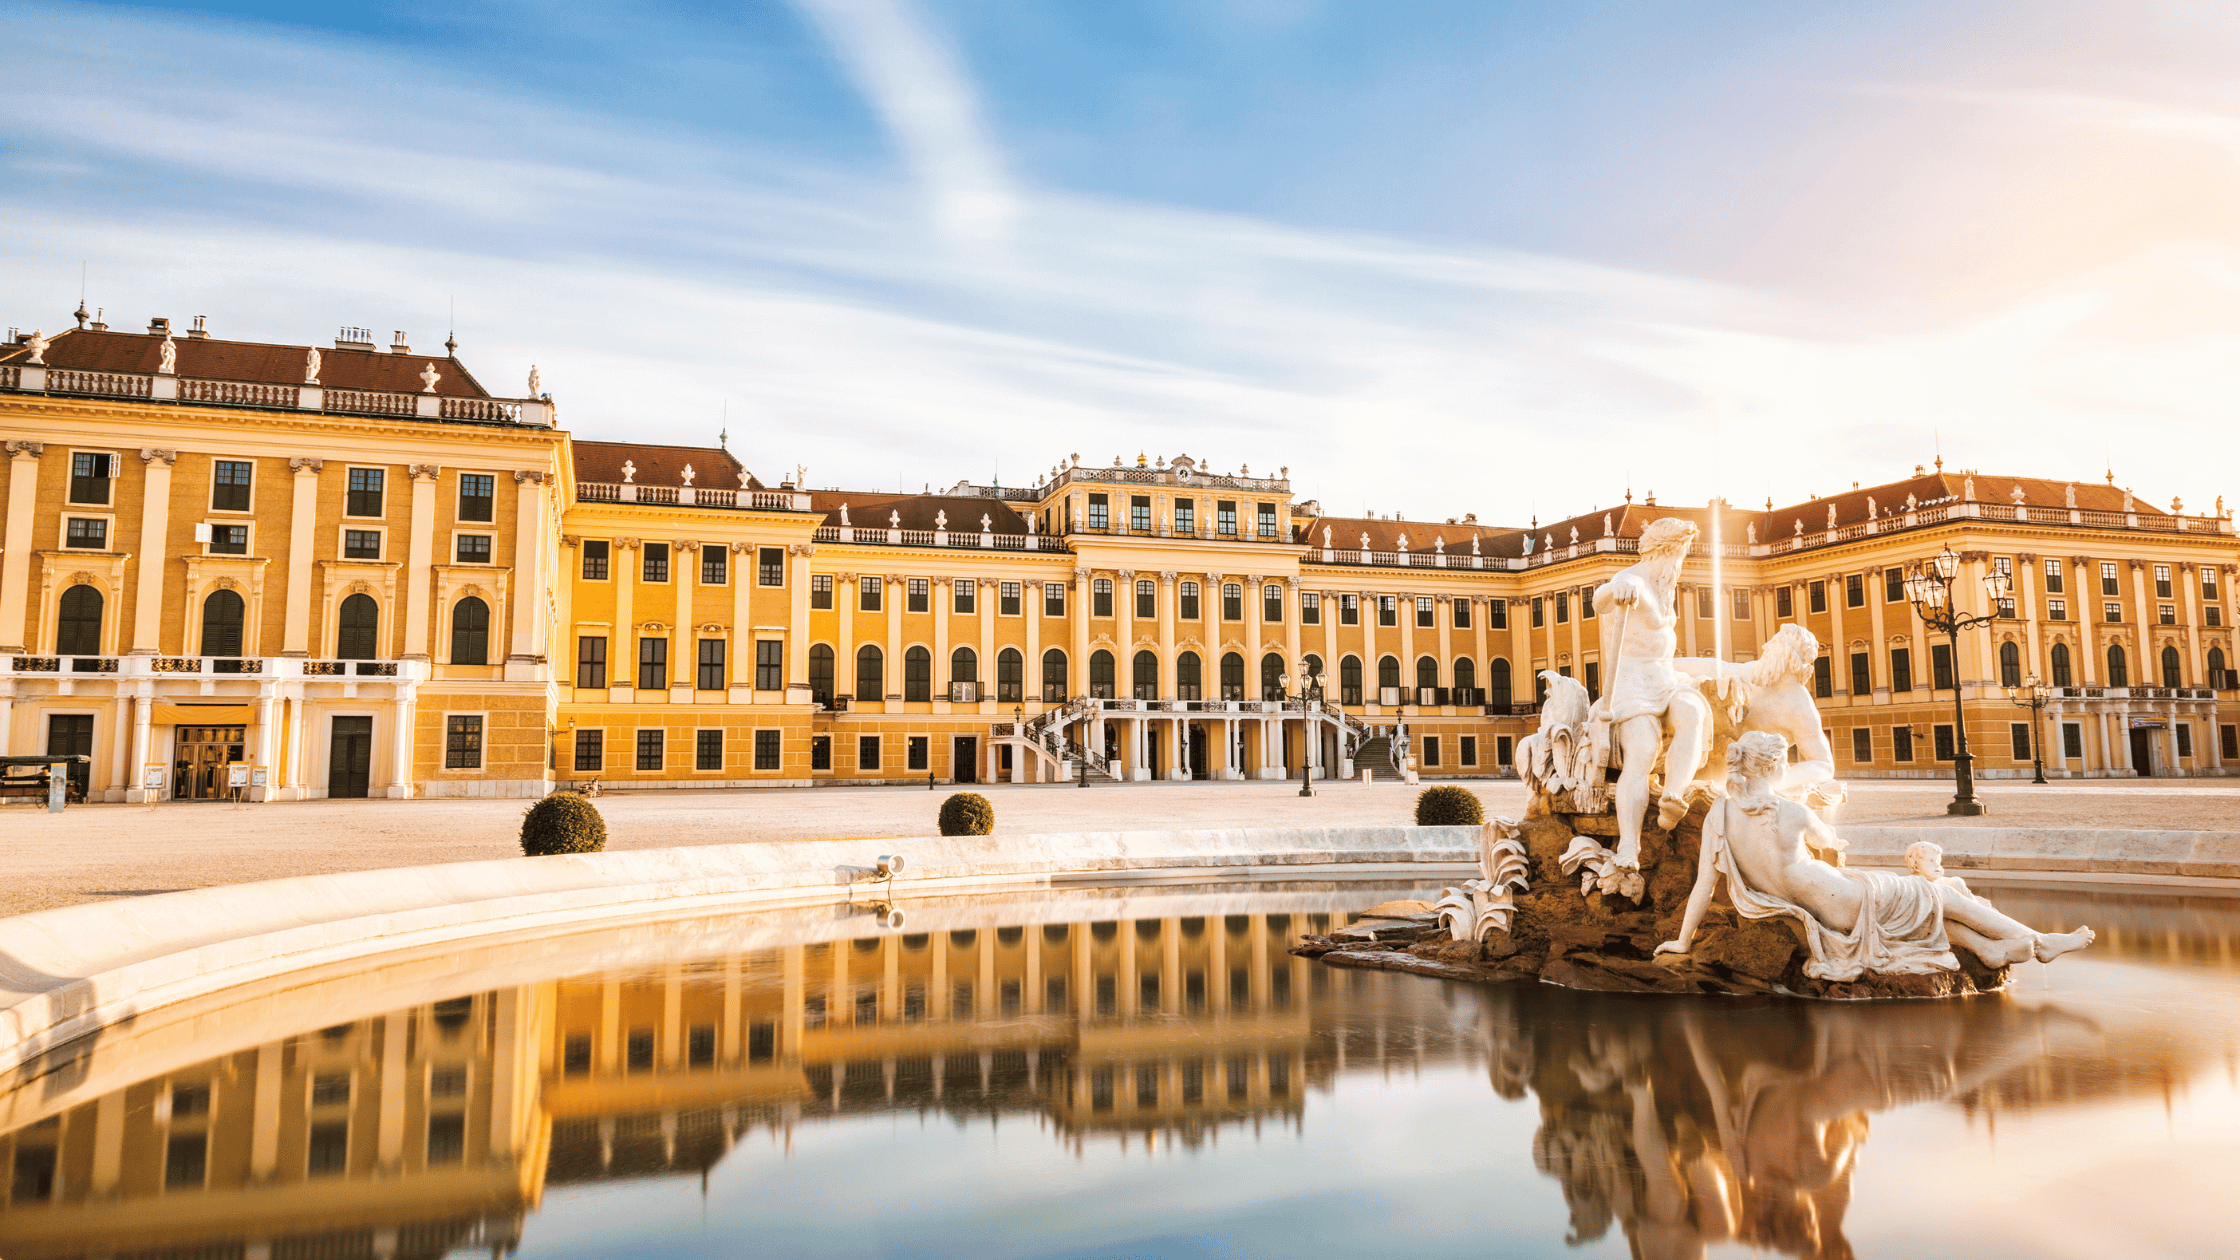 Hosts Global | Discover Austria | Sourcing Guide for Event Planners